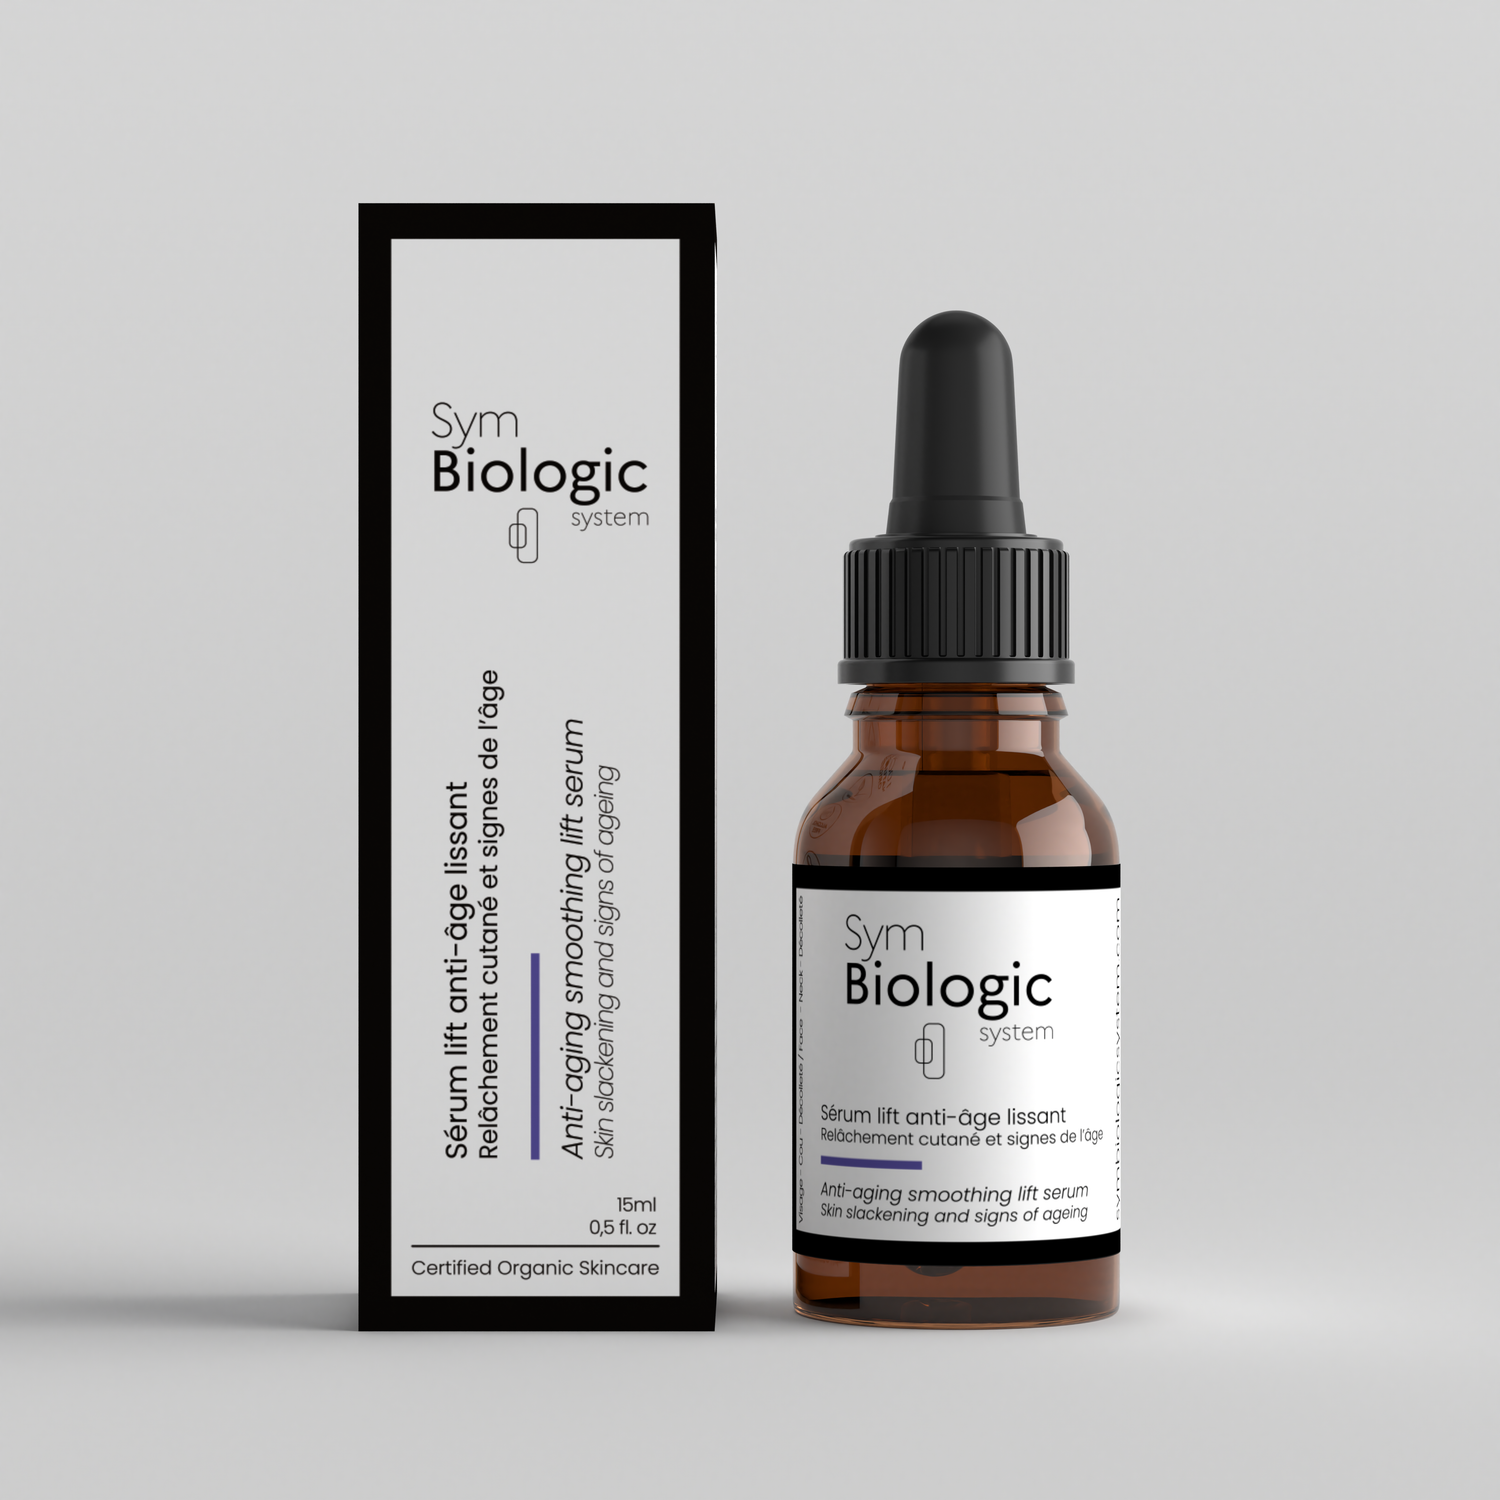 Anti-Aging Smoothing Lift Serum in a 15ml glass dropper bottle with its box on a white background, for firming and smoothing.